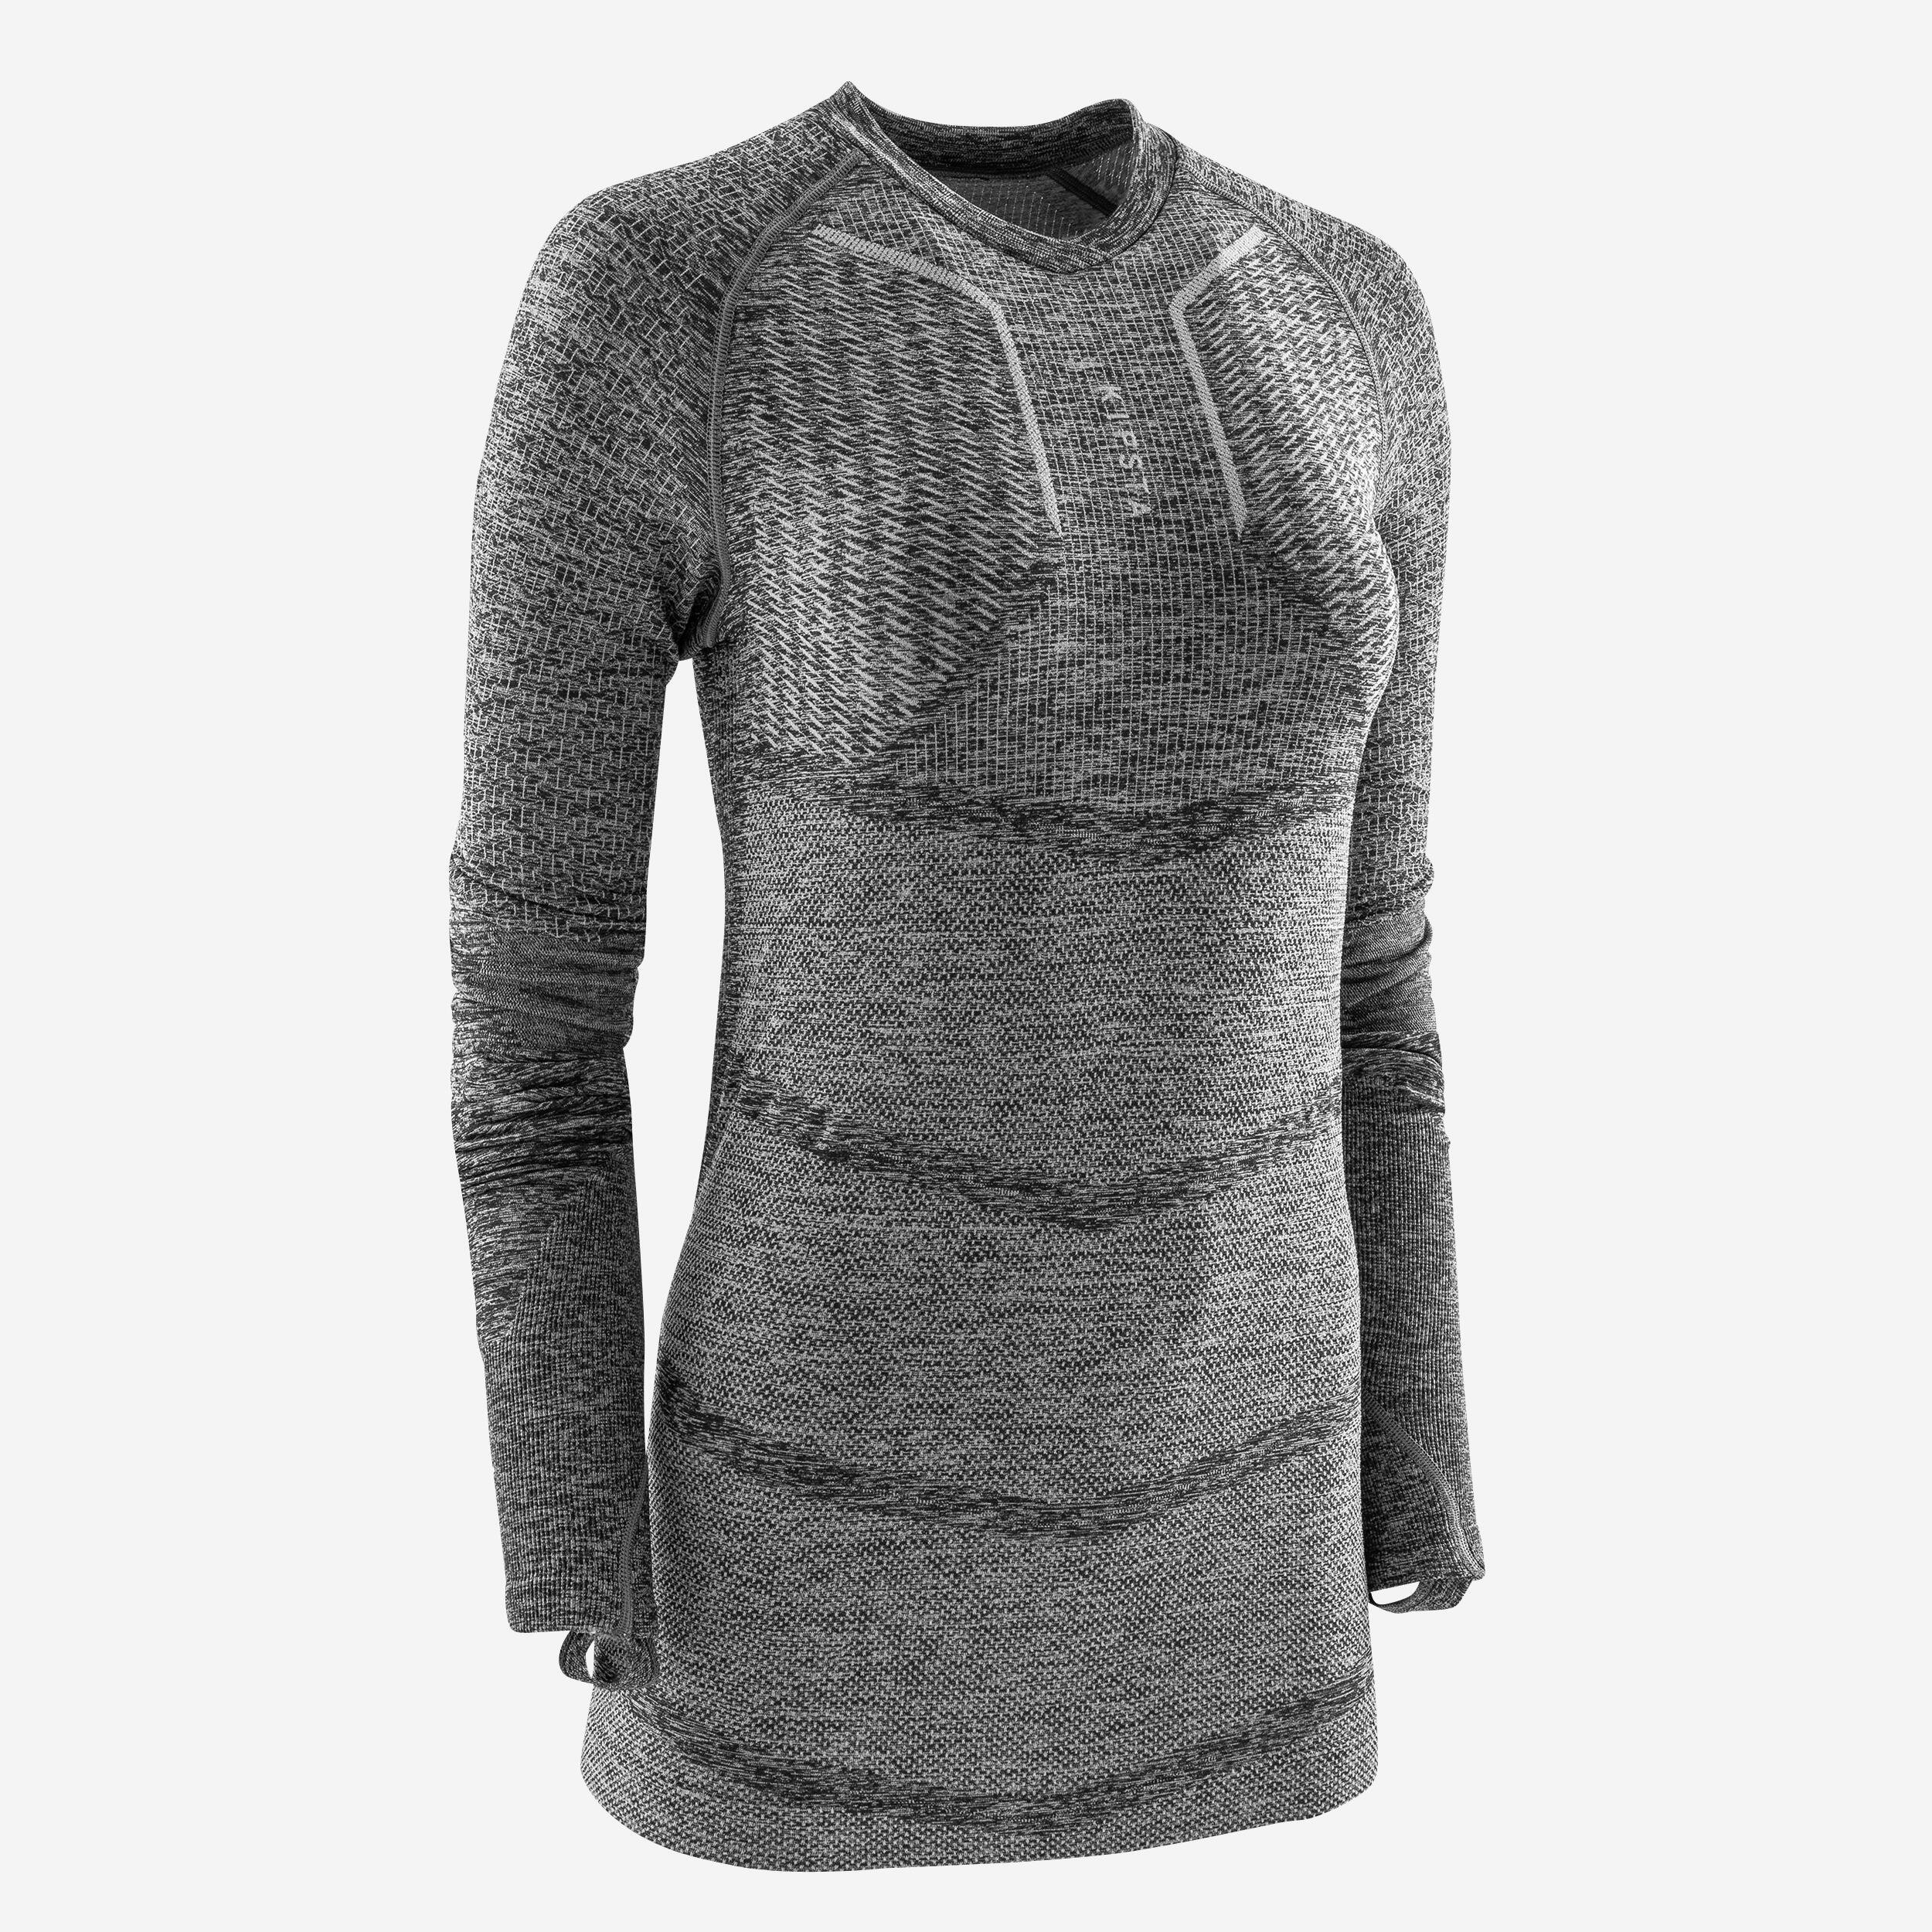 Adult Long-Sleeved Thermal Base Layer Top Keepdry 500 - Mottled Grey 2/10